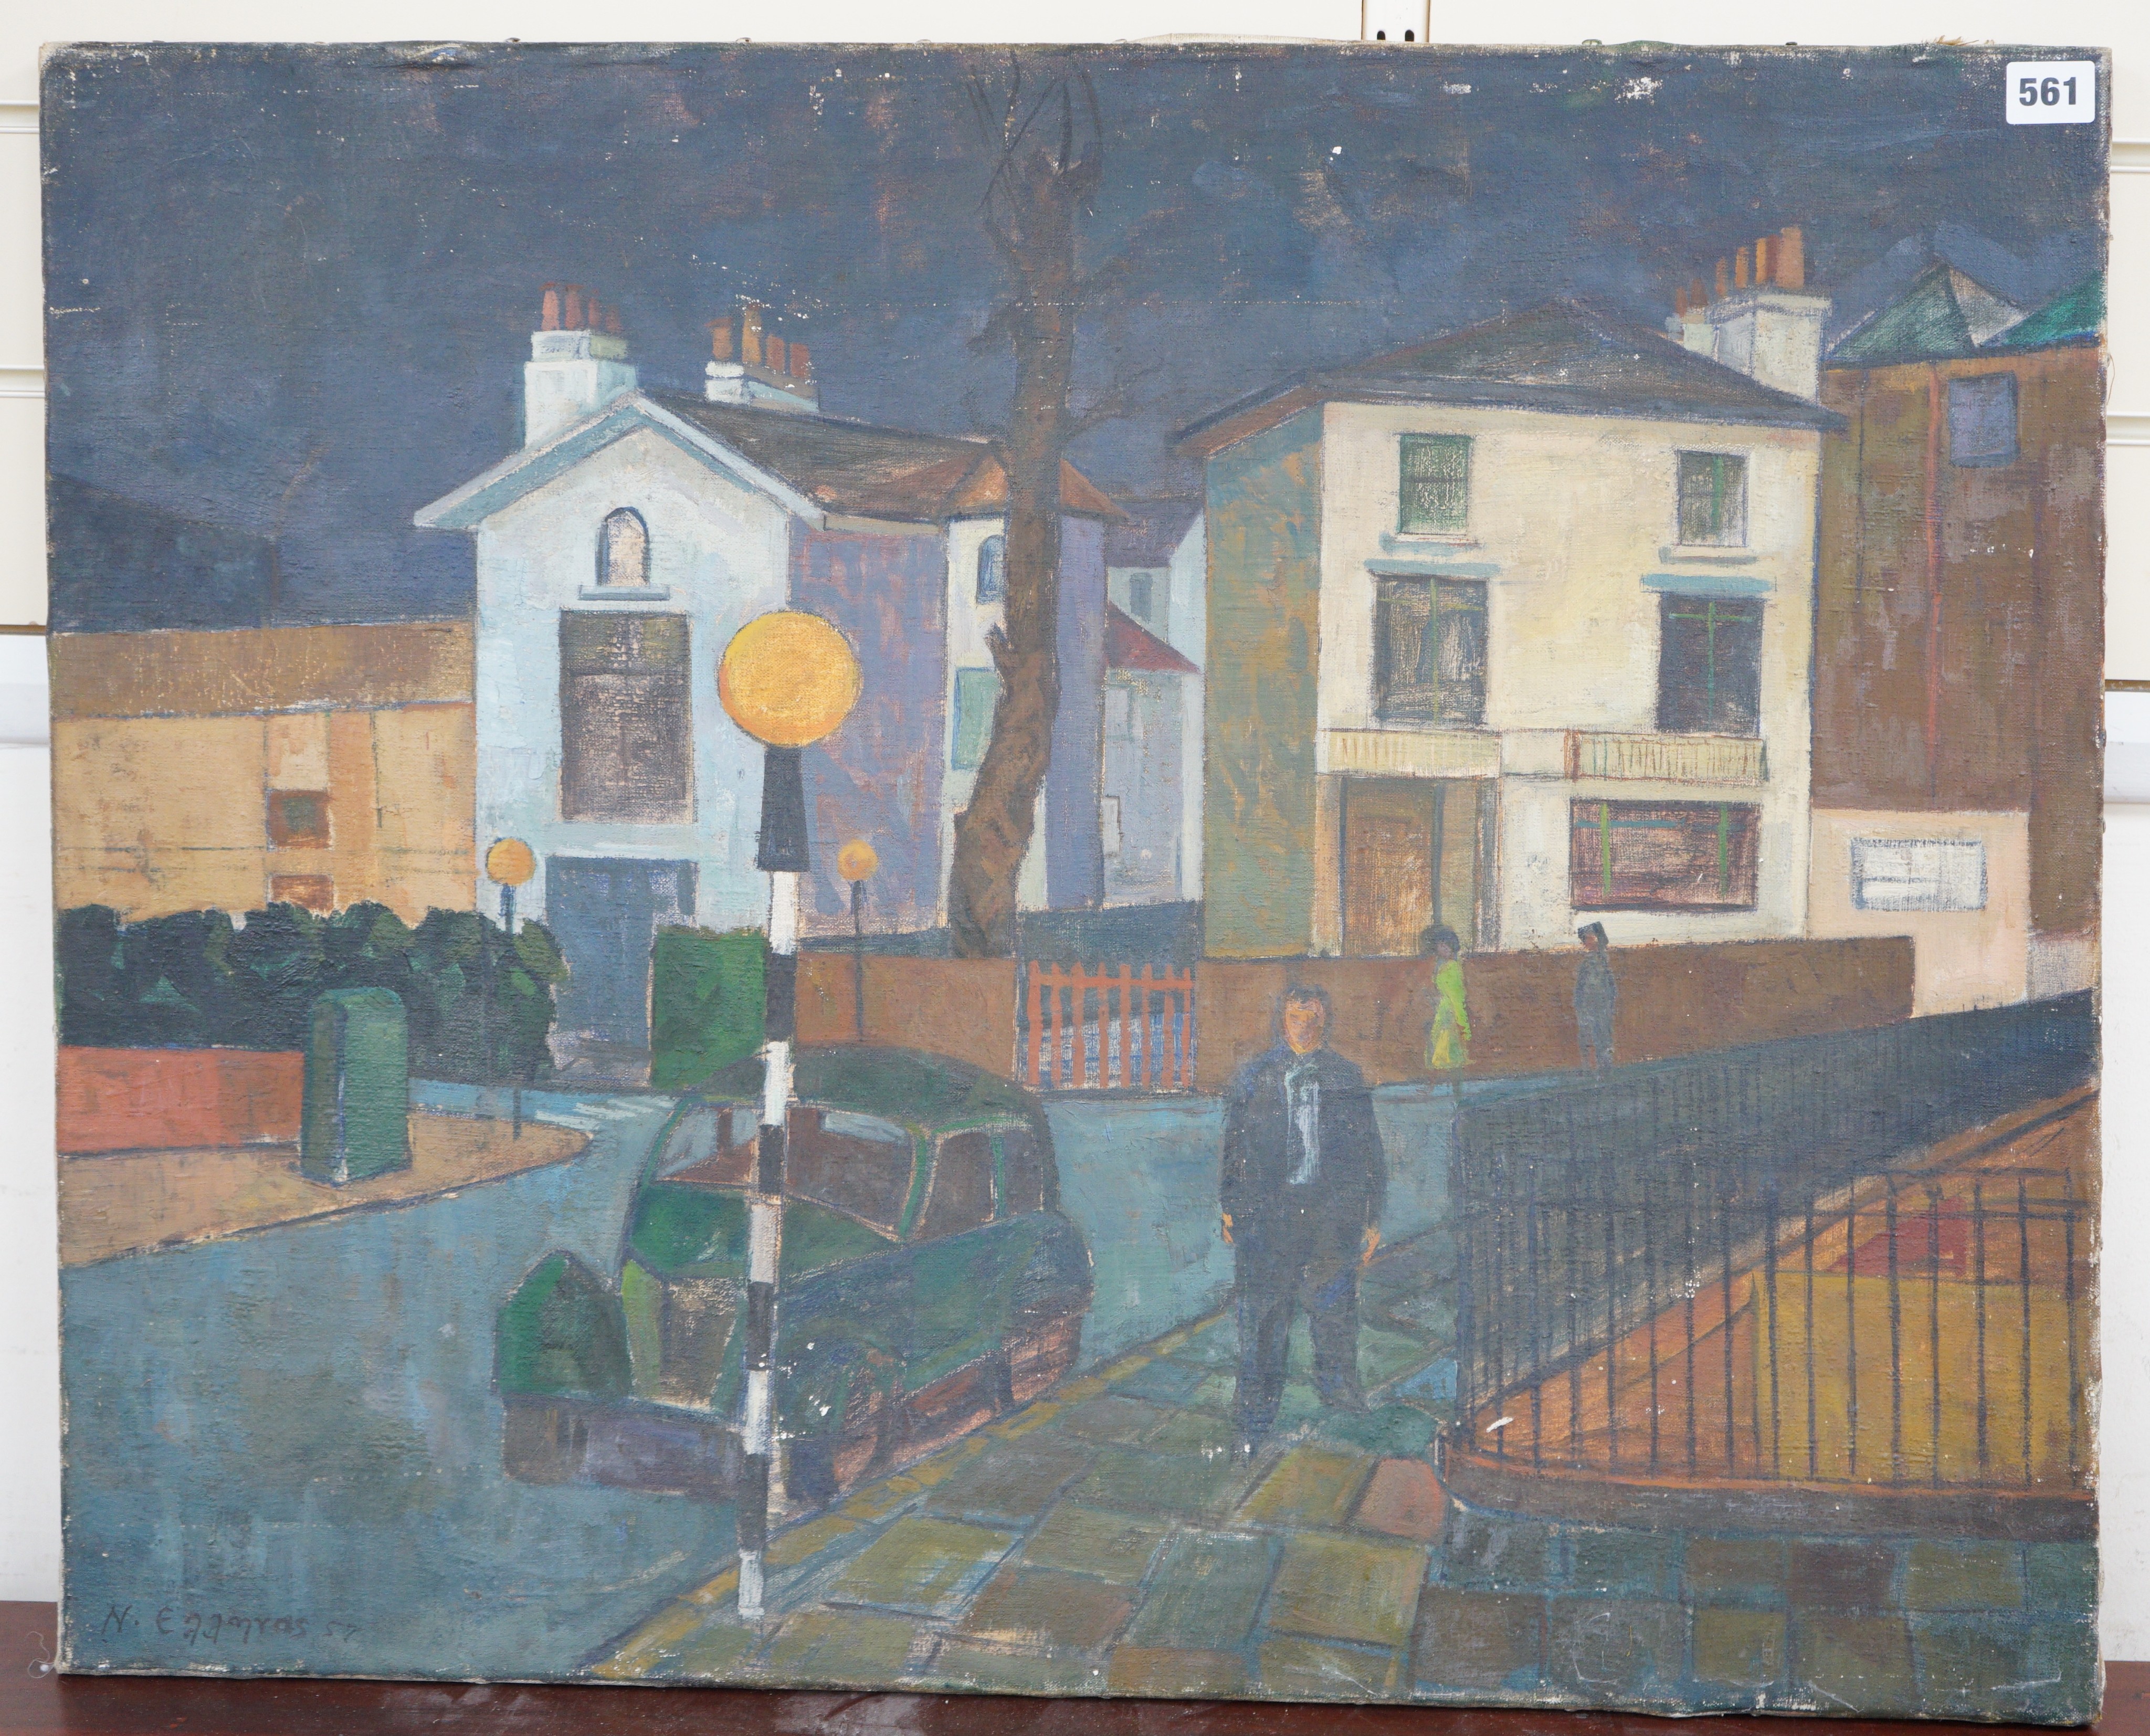 Neaamras (Modern British), oil on canvas, Street scene, signed and dated '57, a studio nude sketch verso, with examination label verso, 61 x 76cm, unframed